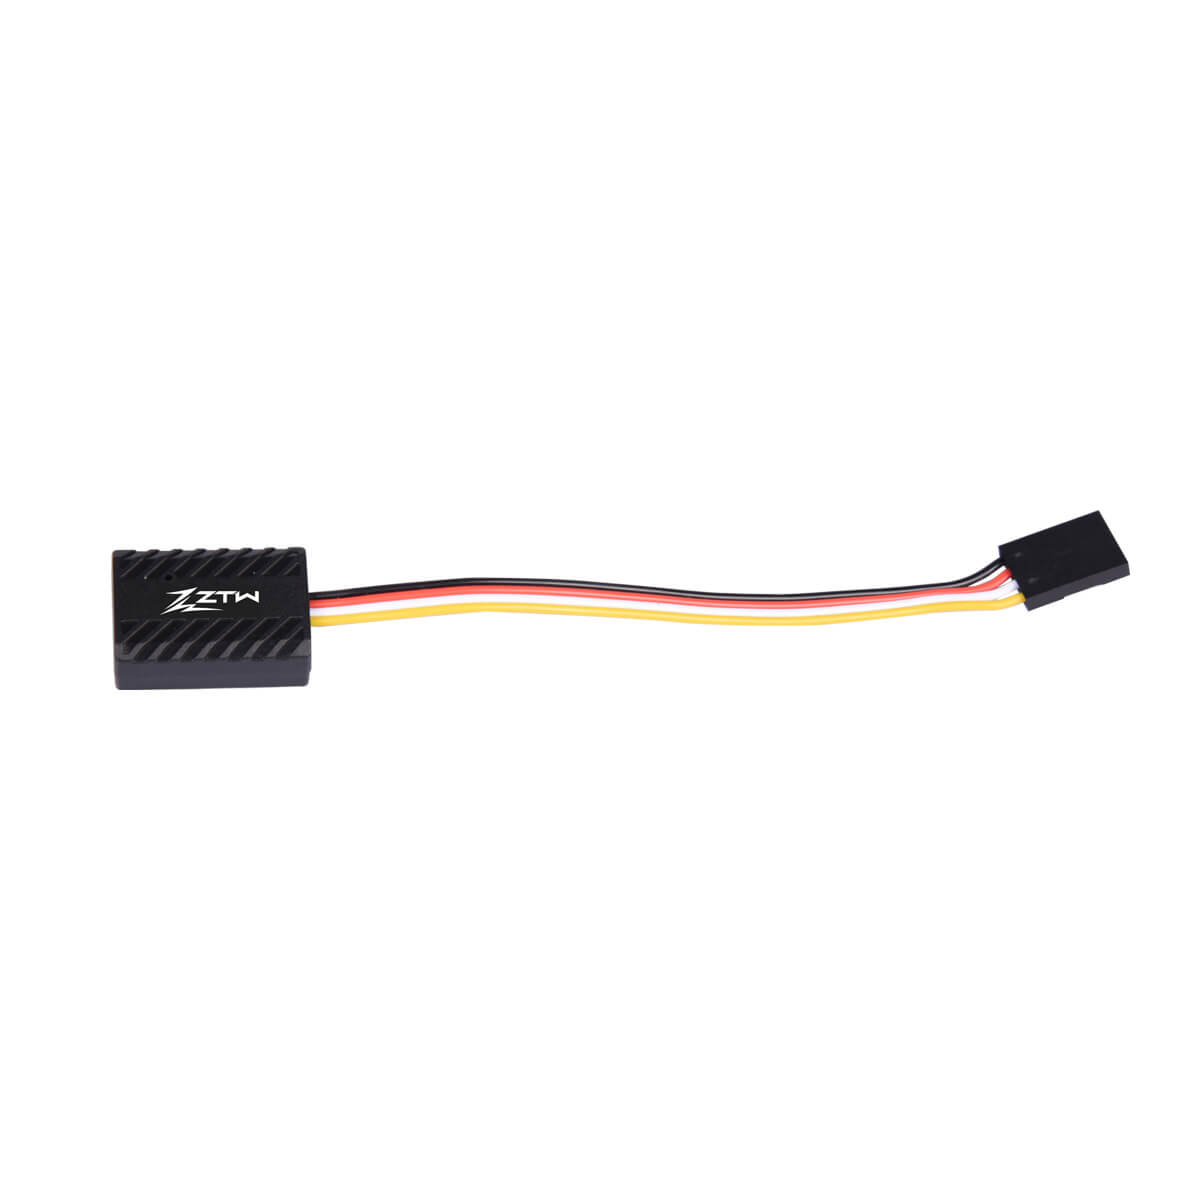 ZTW Beast PRO G2 160A ESC Turbo 2-3S For 1/10th RC Racing Car